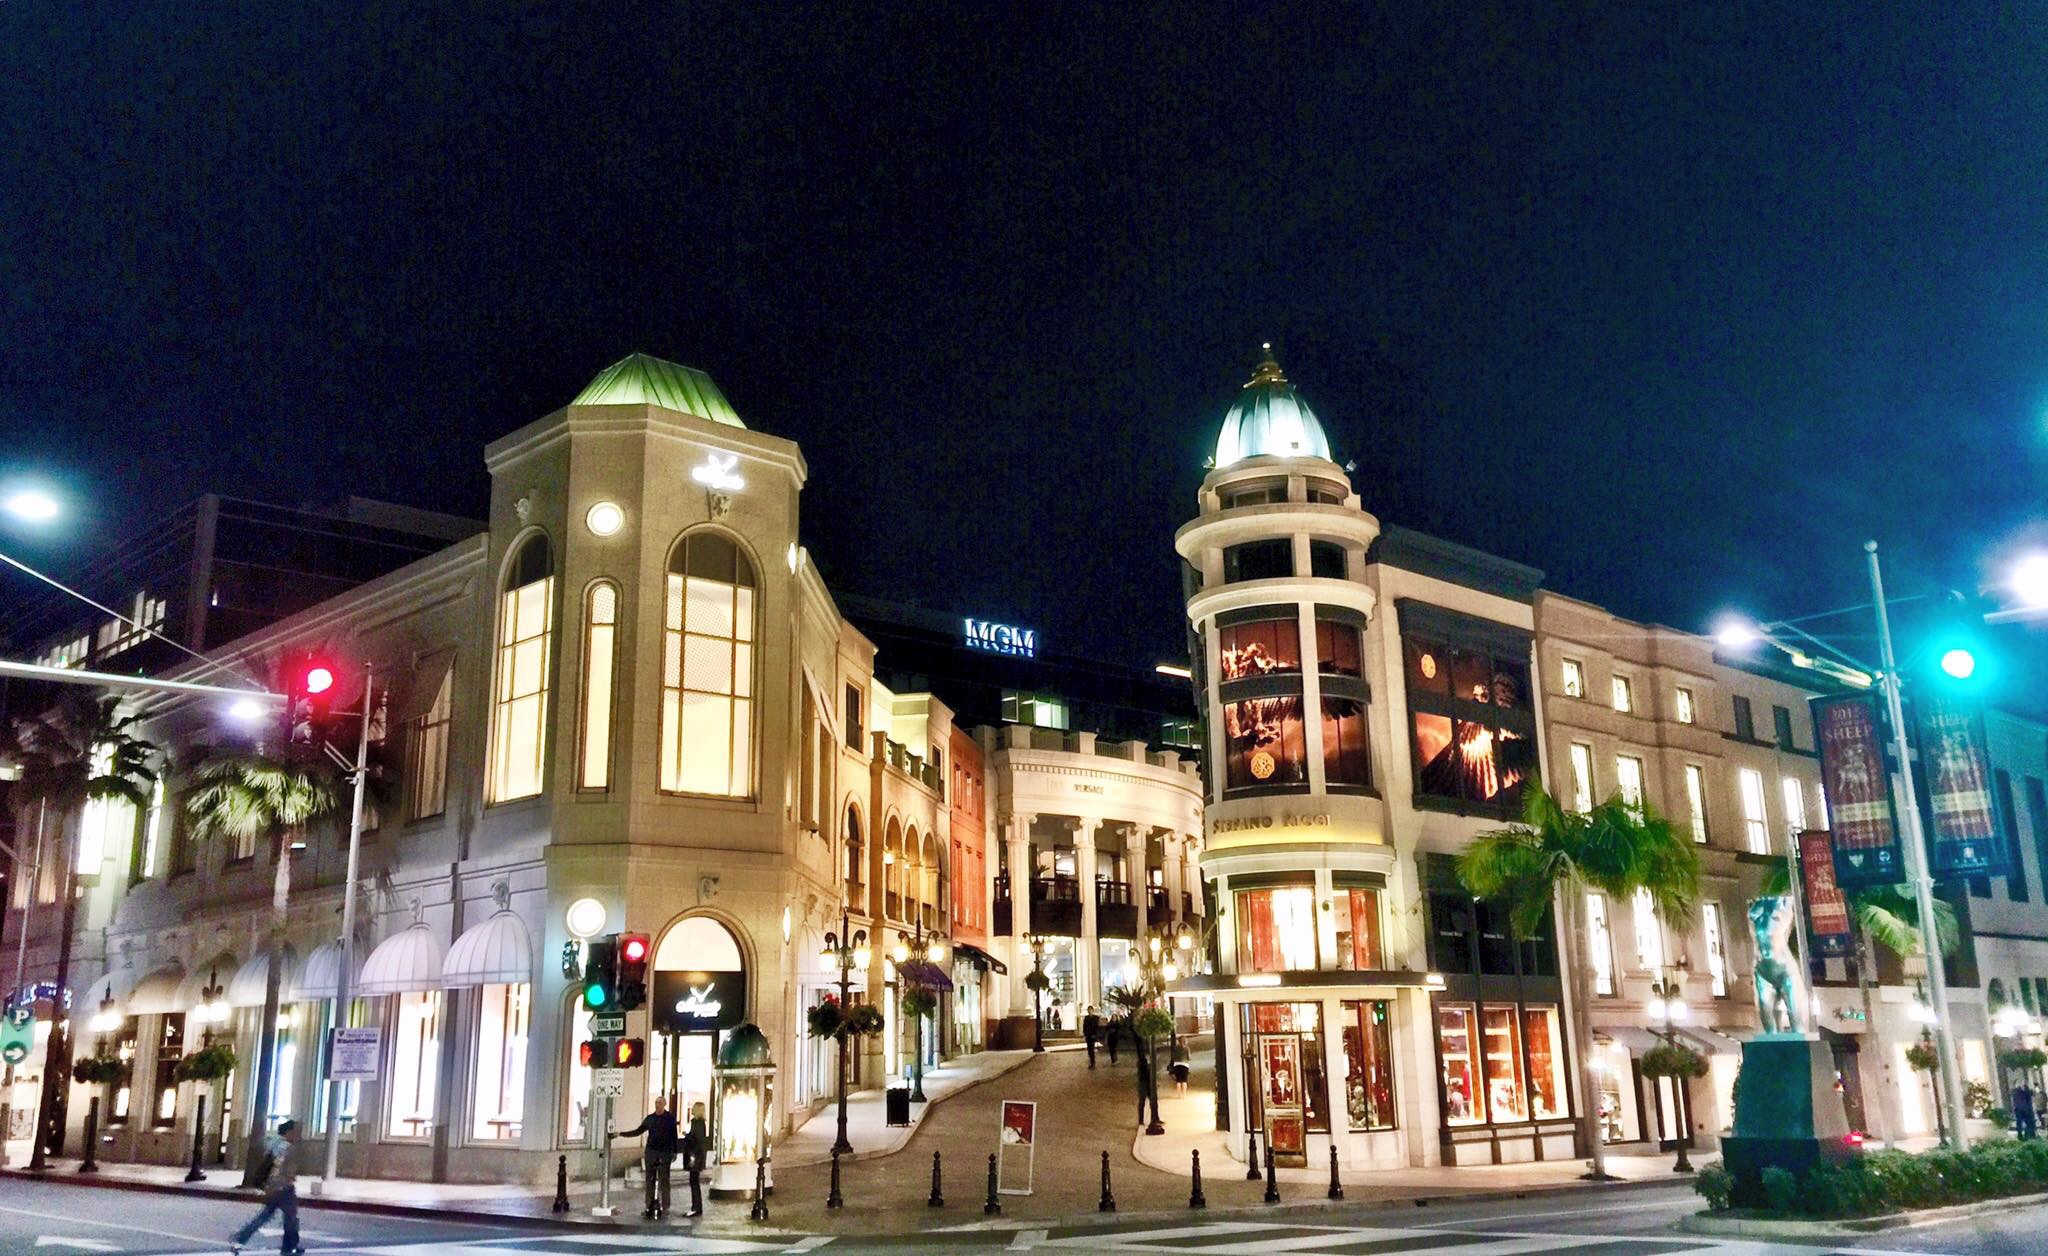 Rodeo Drive And Dayton Way Crossroad By Night. Beverly Hills